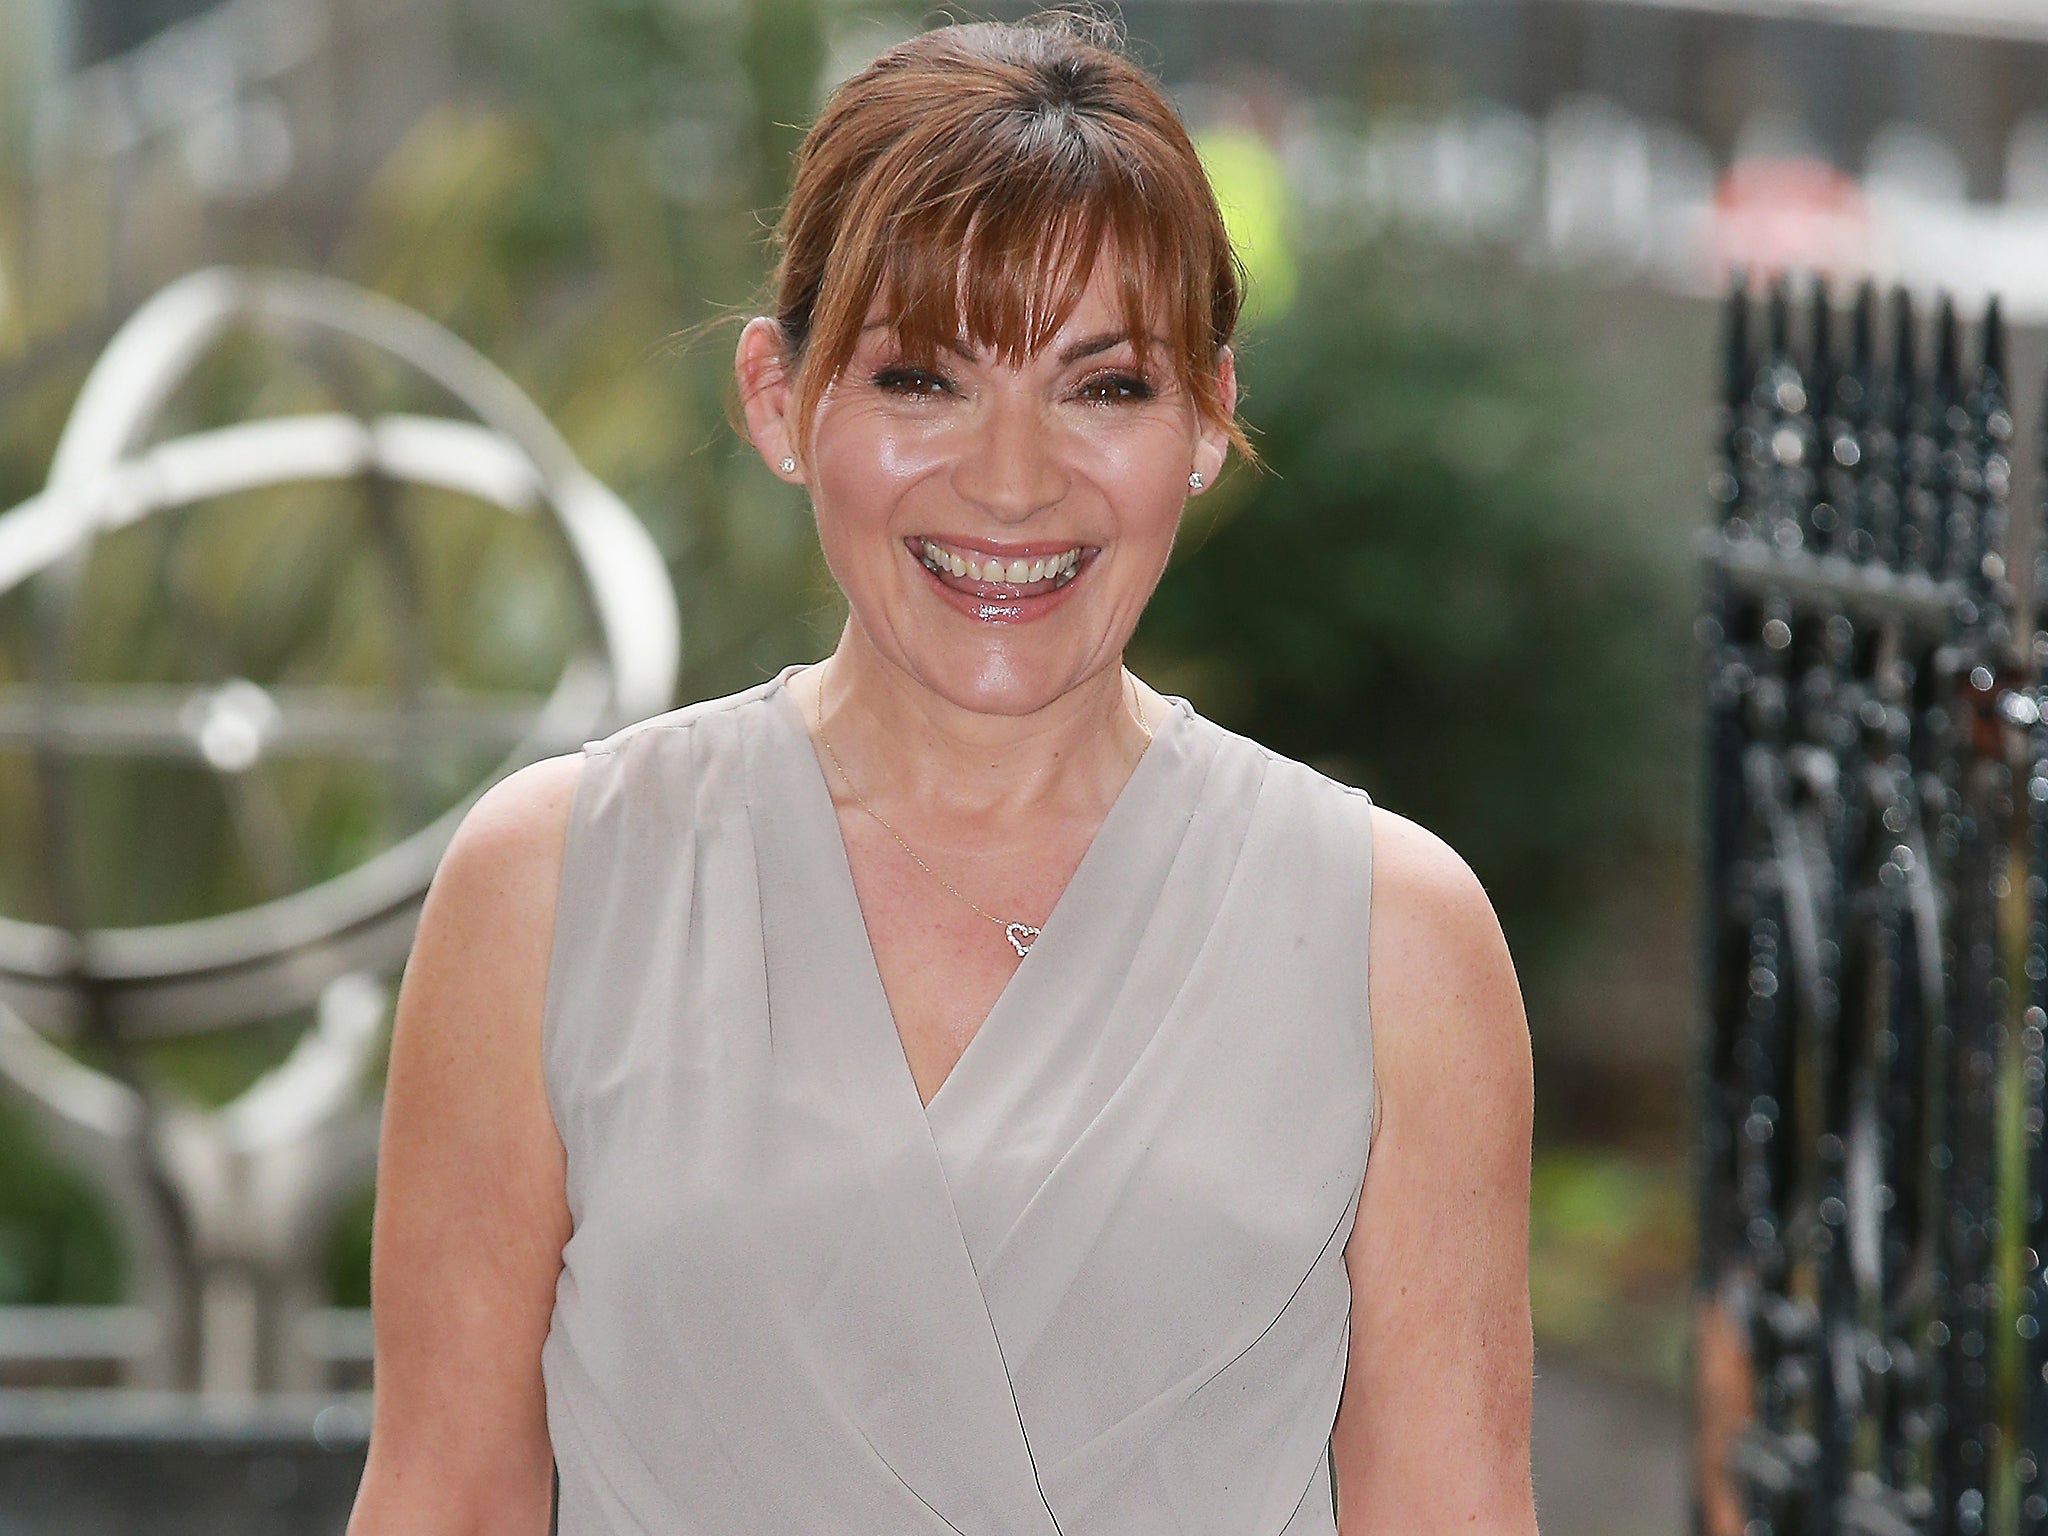 Lorraine Kelly said the continued existence of homelessness in Britain was 'shameful'